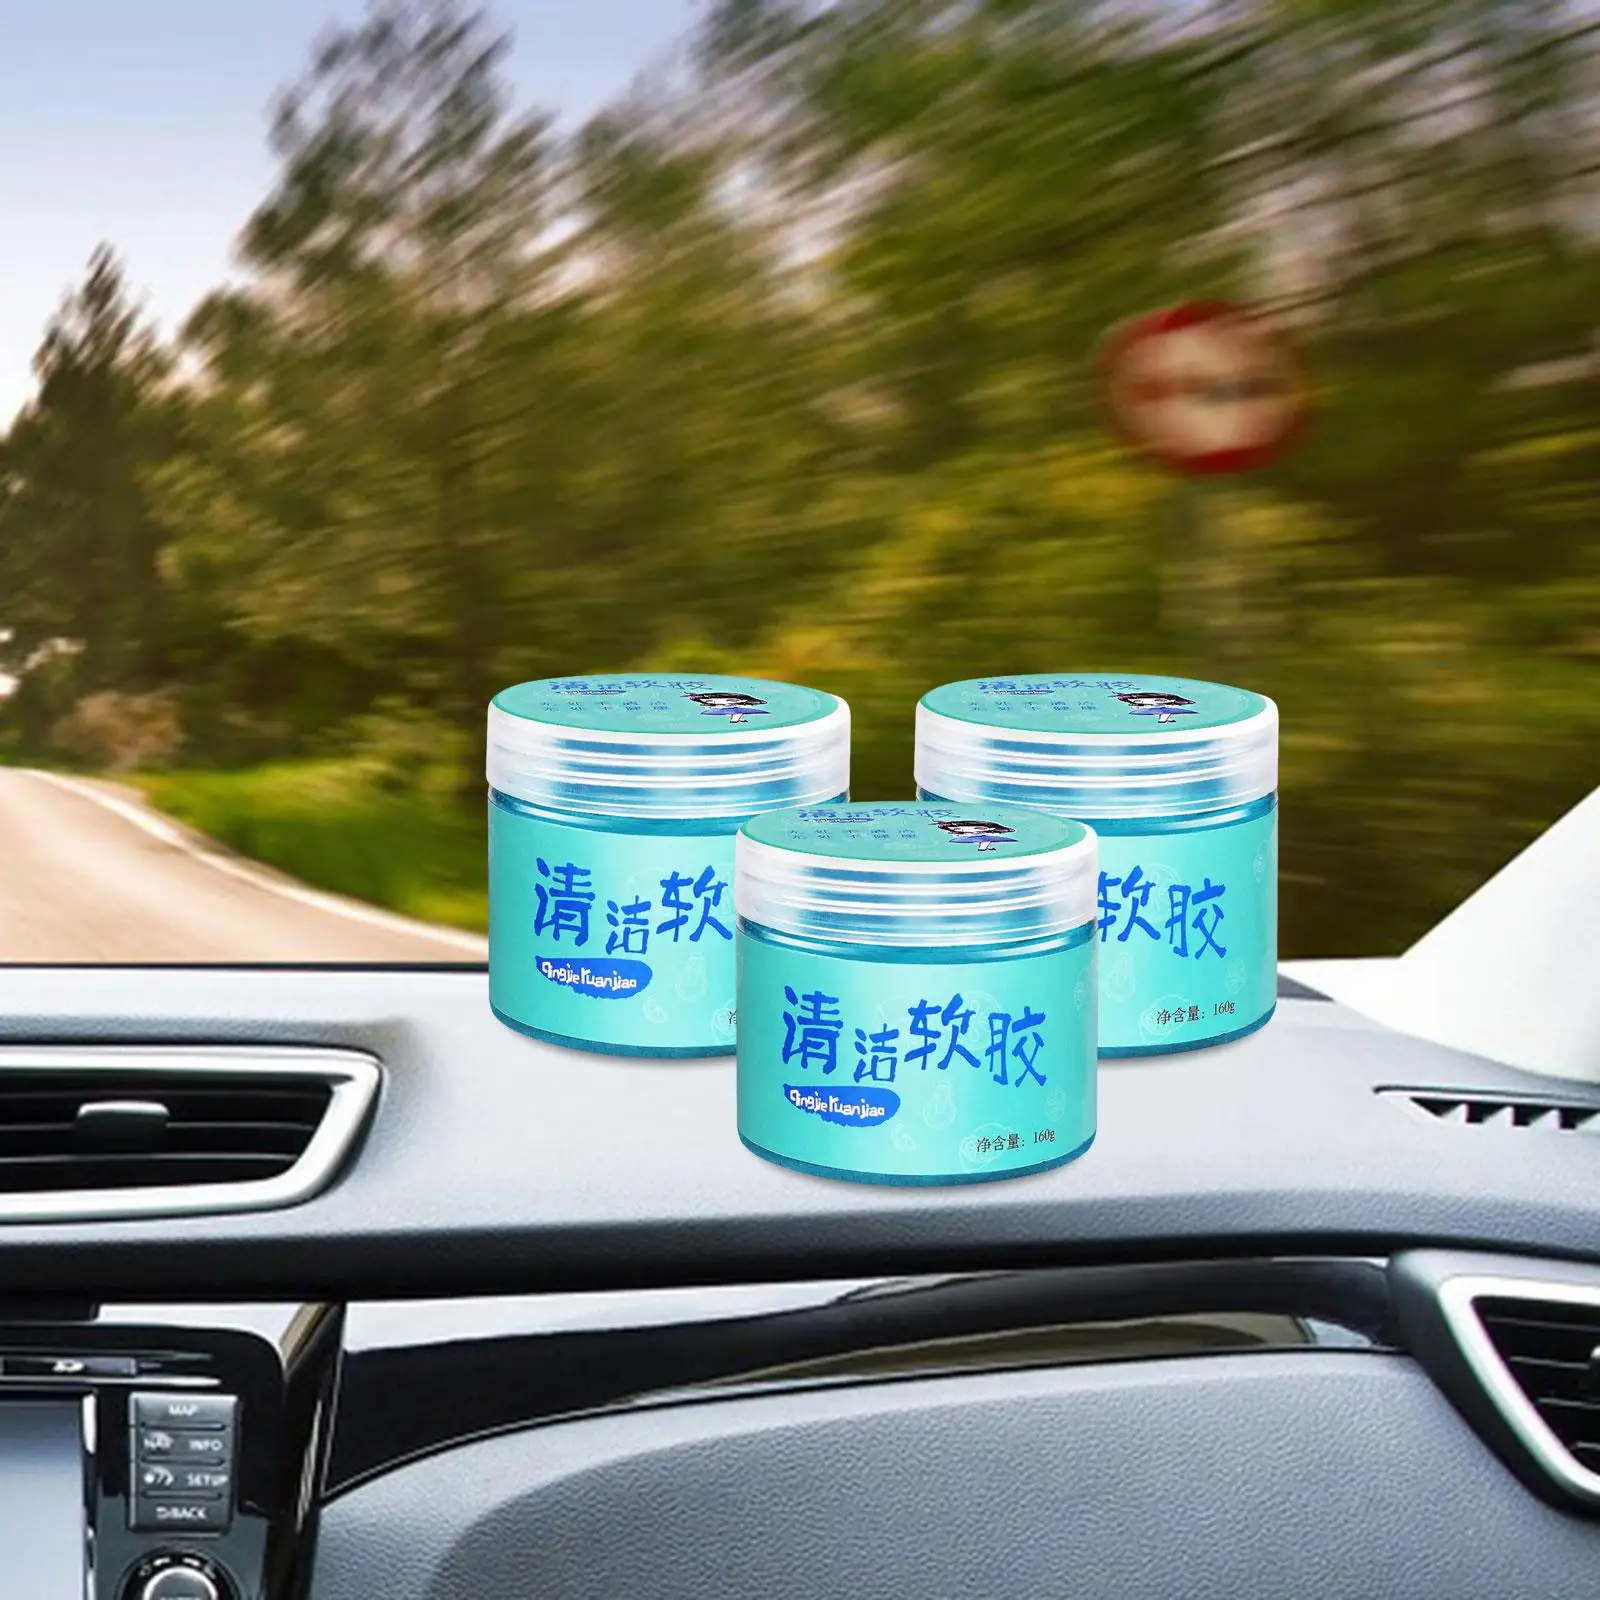 Dust Cleaning Gel Universal Auto Detailing Tools Car Cleaner Putty Interior Car Cleaning Gels for Tablet Keyboard Printer PC